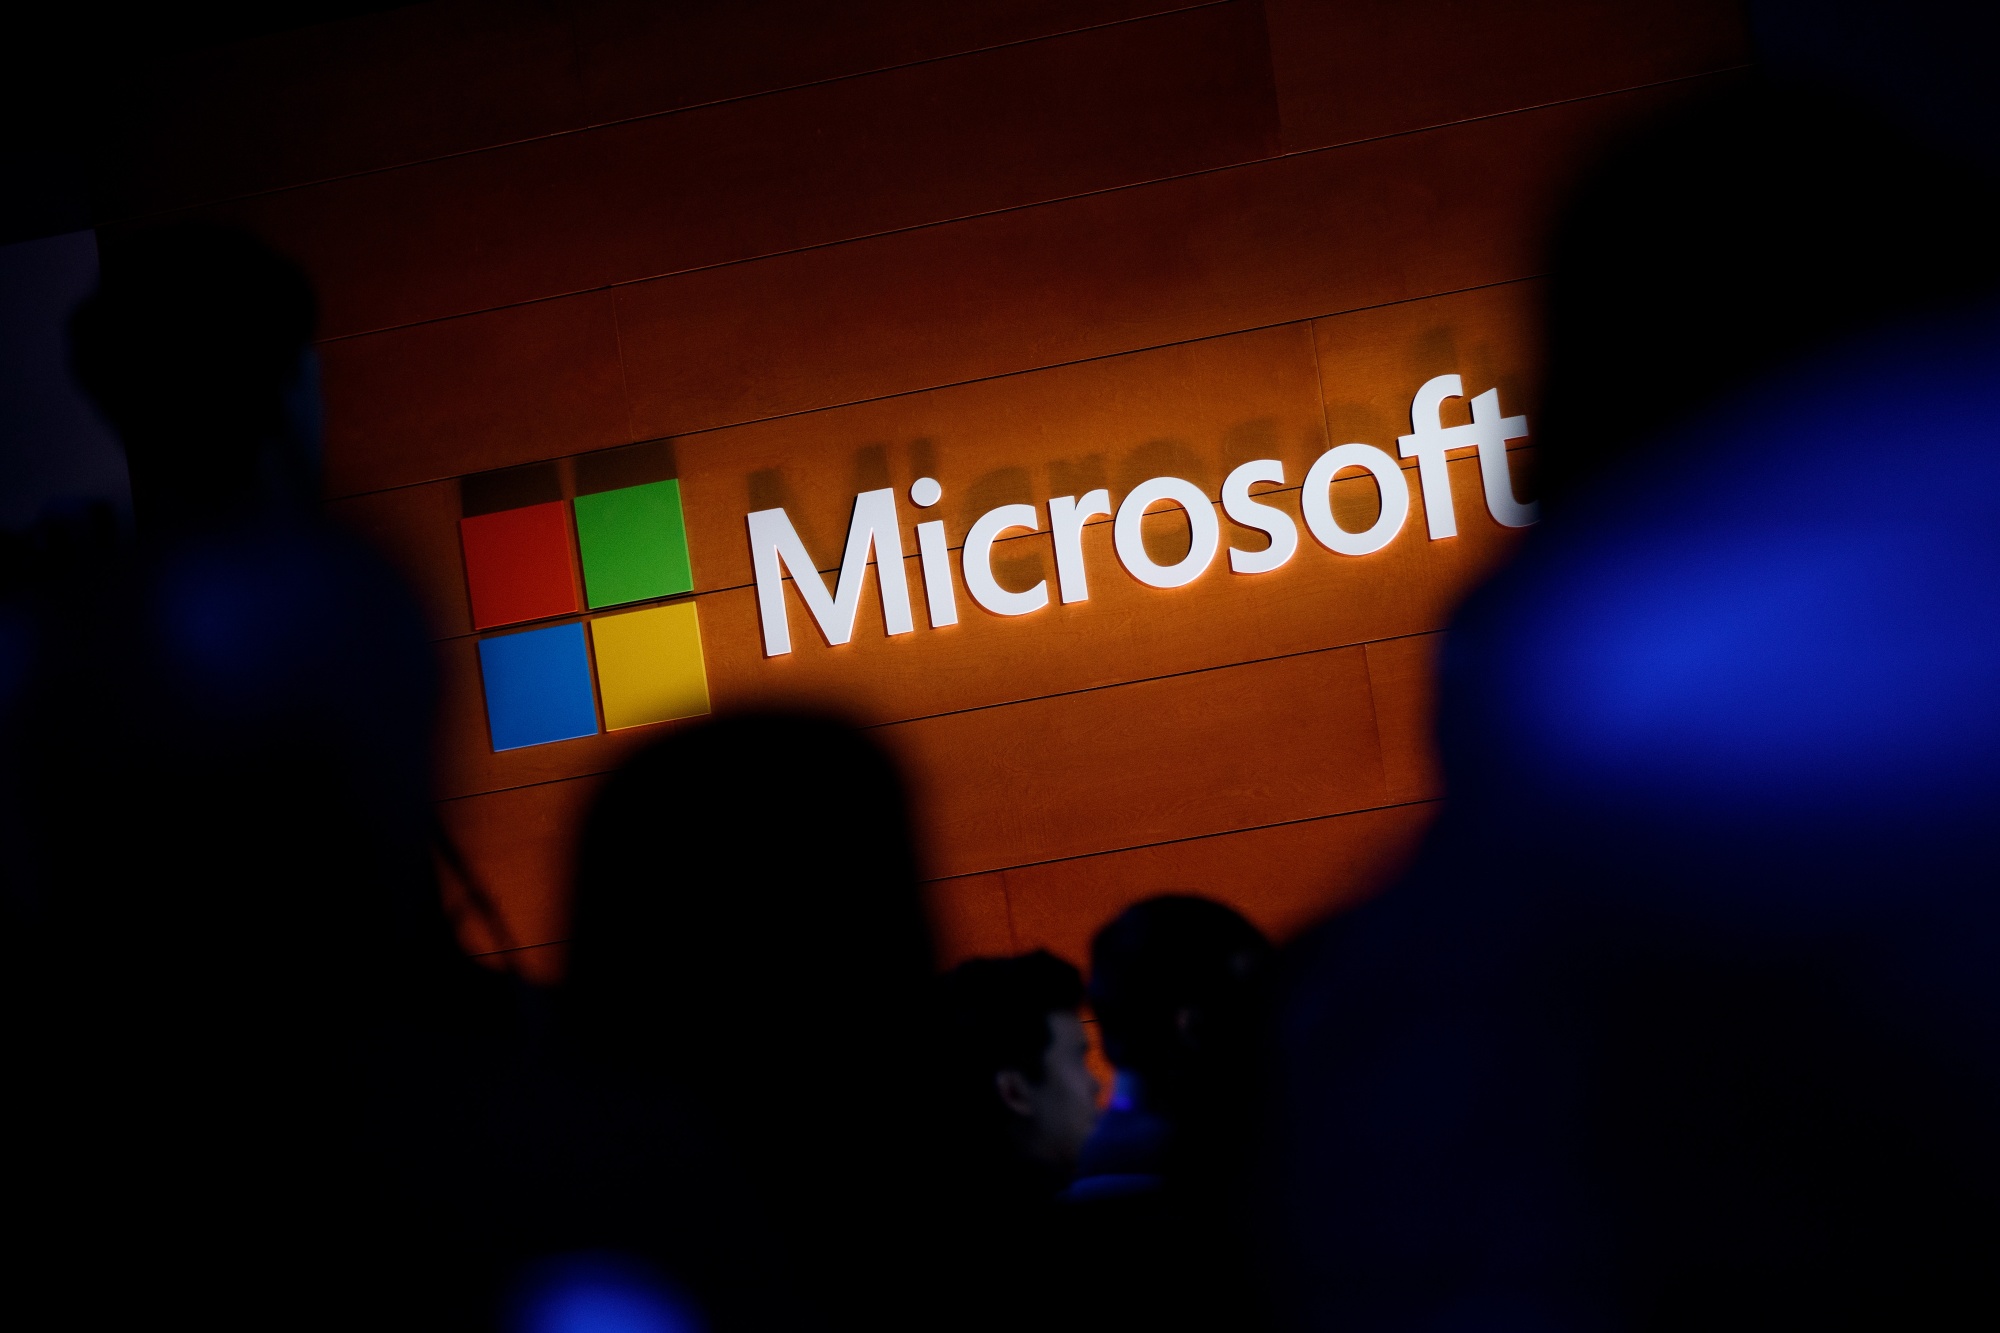 Microsoft's Windows 10 coming sooner than expected - CBS News